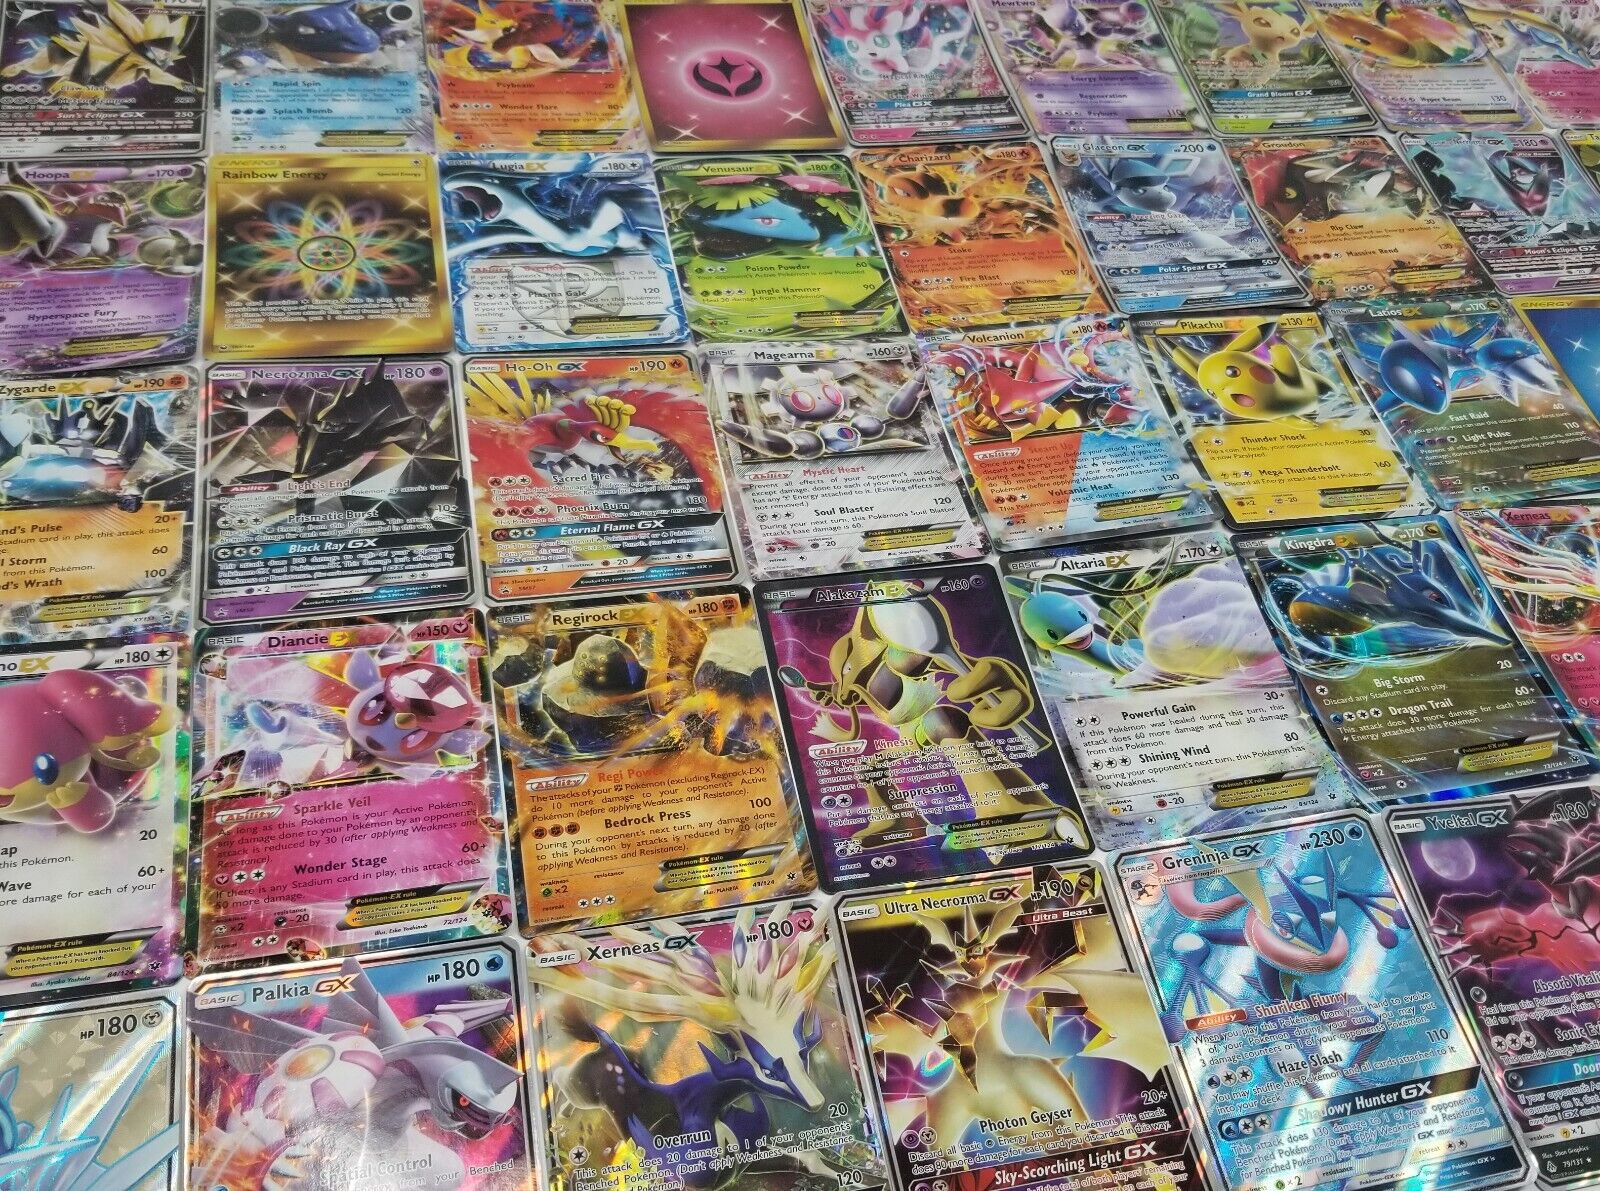 Pokemon 100 Official TCG Cards Lot with Ultra Rare Included - GX EX MEGA + HOLOS